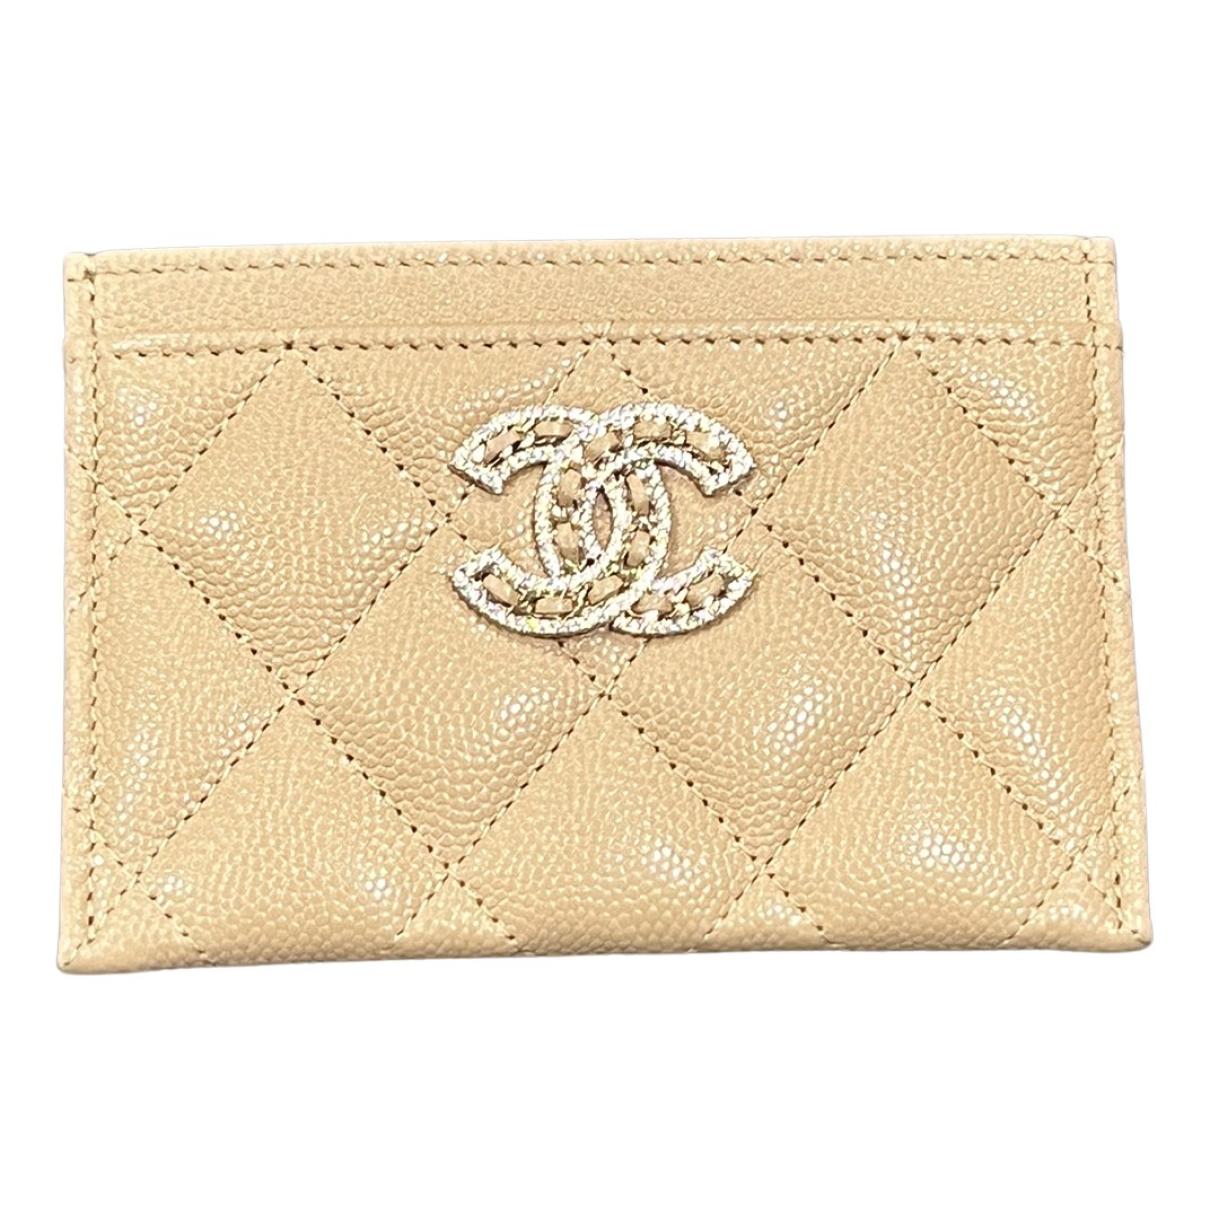 Chanel Classic Quilted Caviar Black Cardholder Gold Hardware Flap